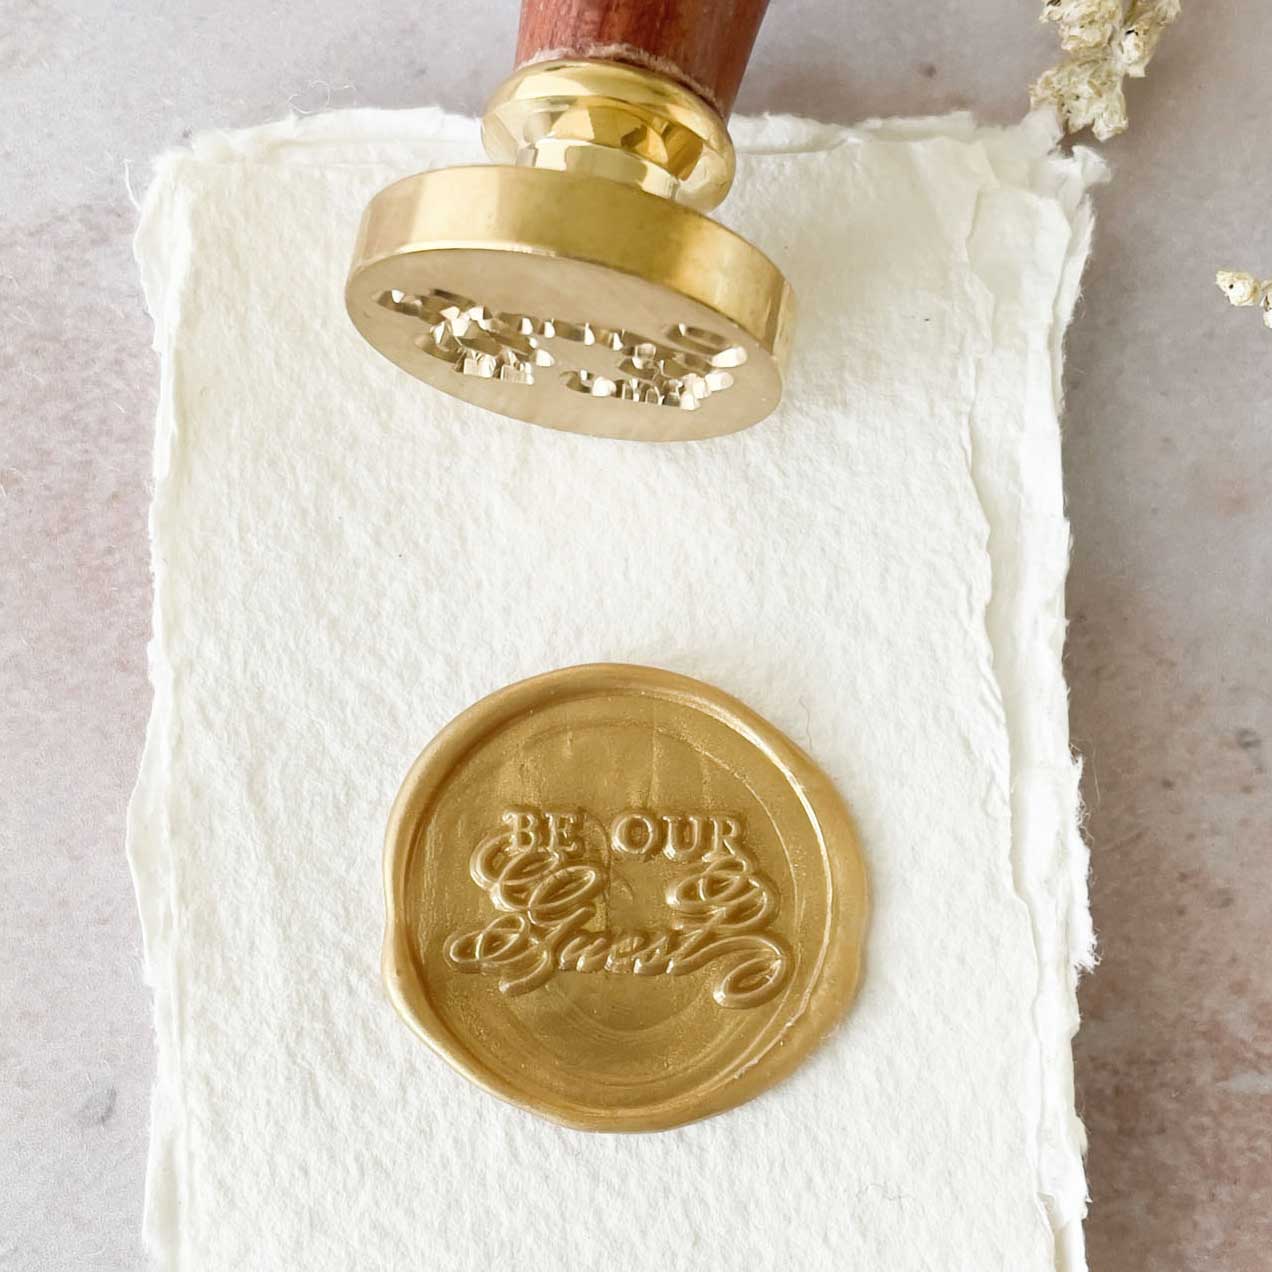 Be-our-guest-wax-invitation-stamp